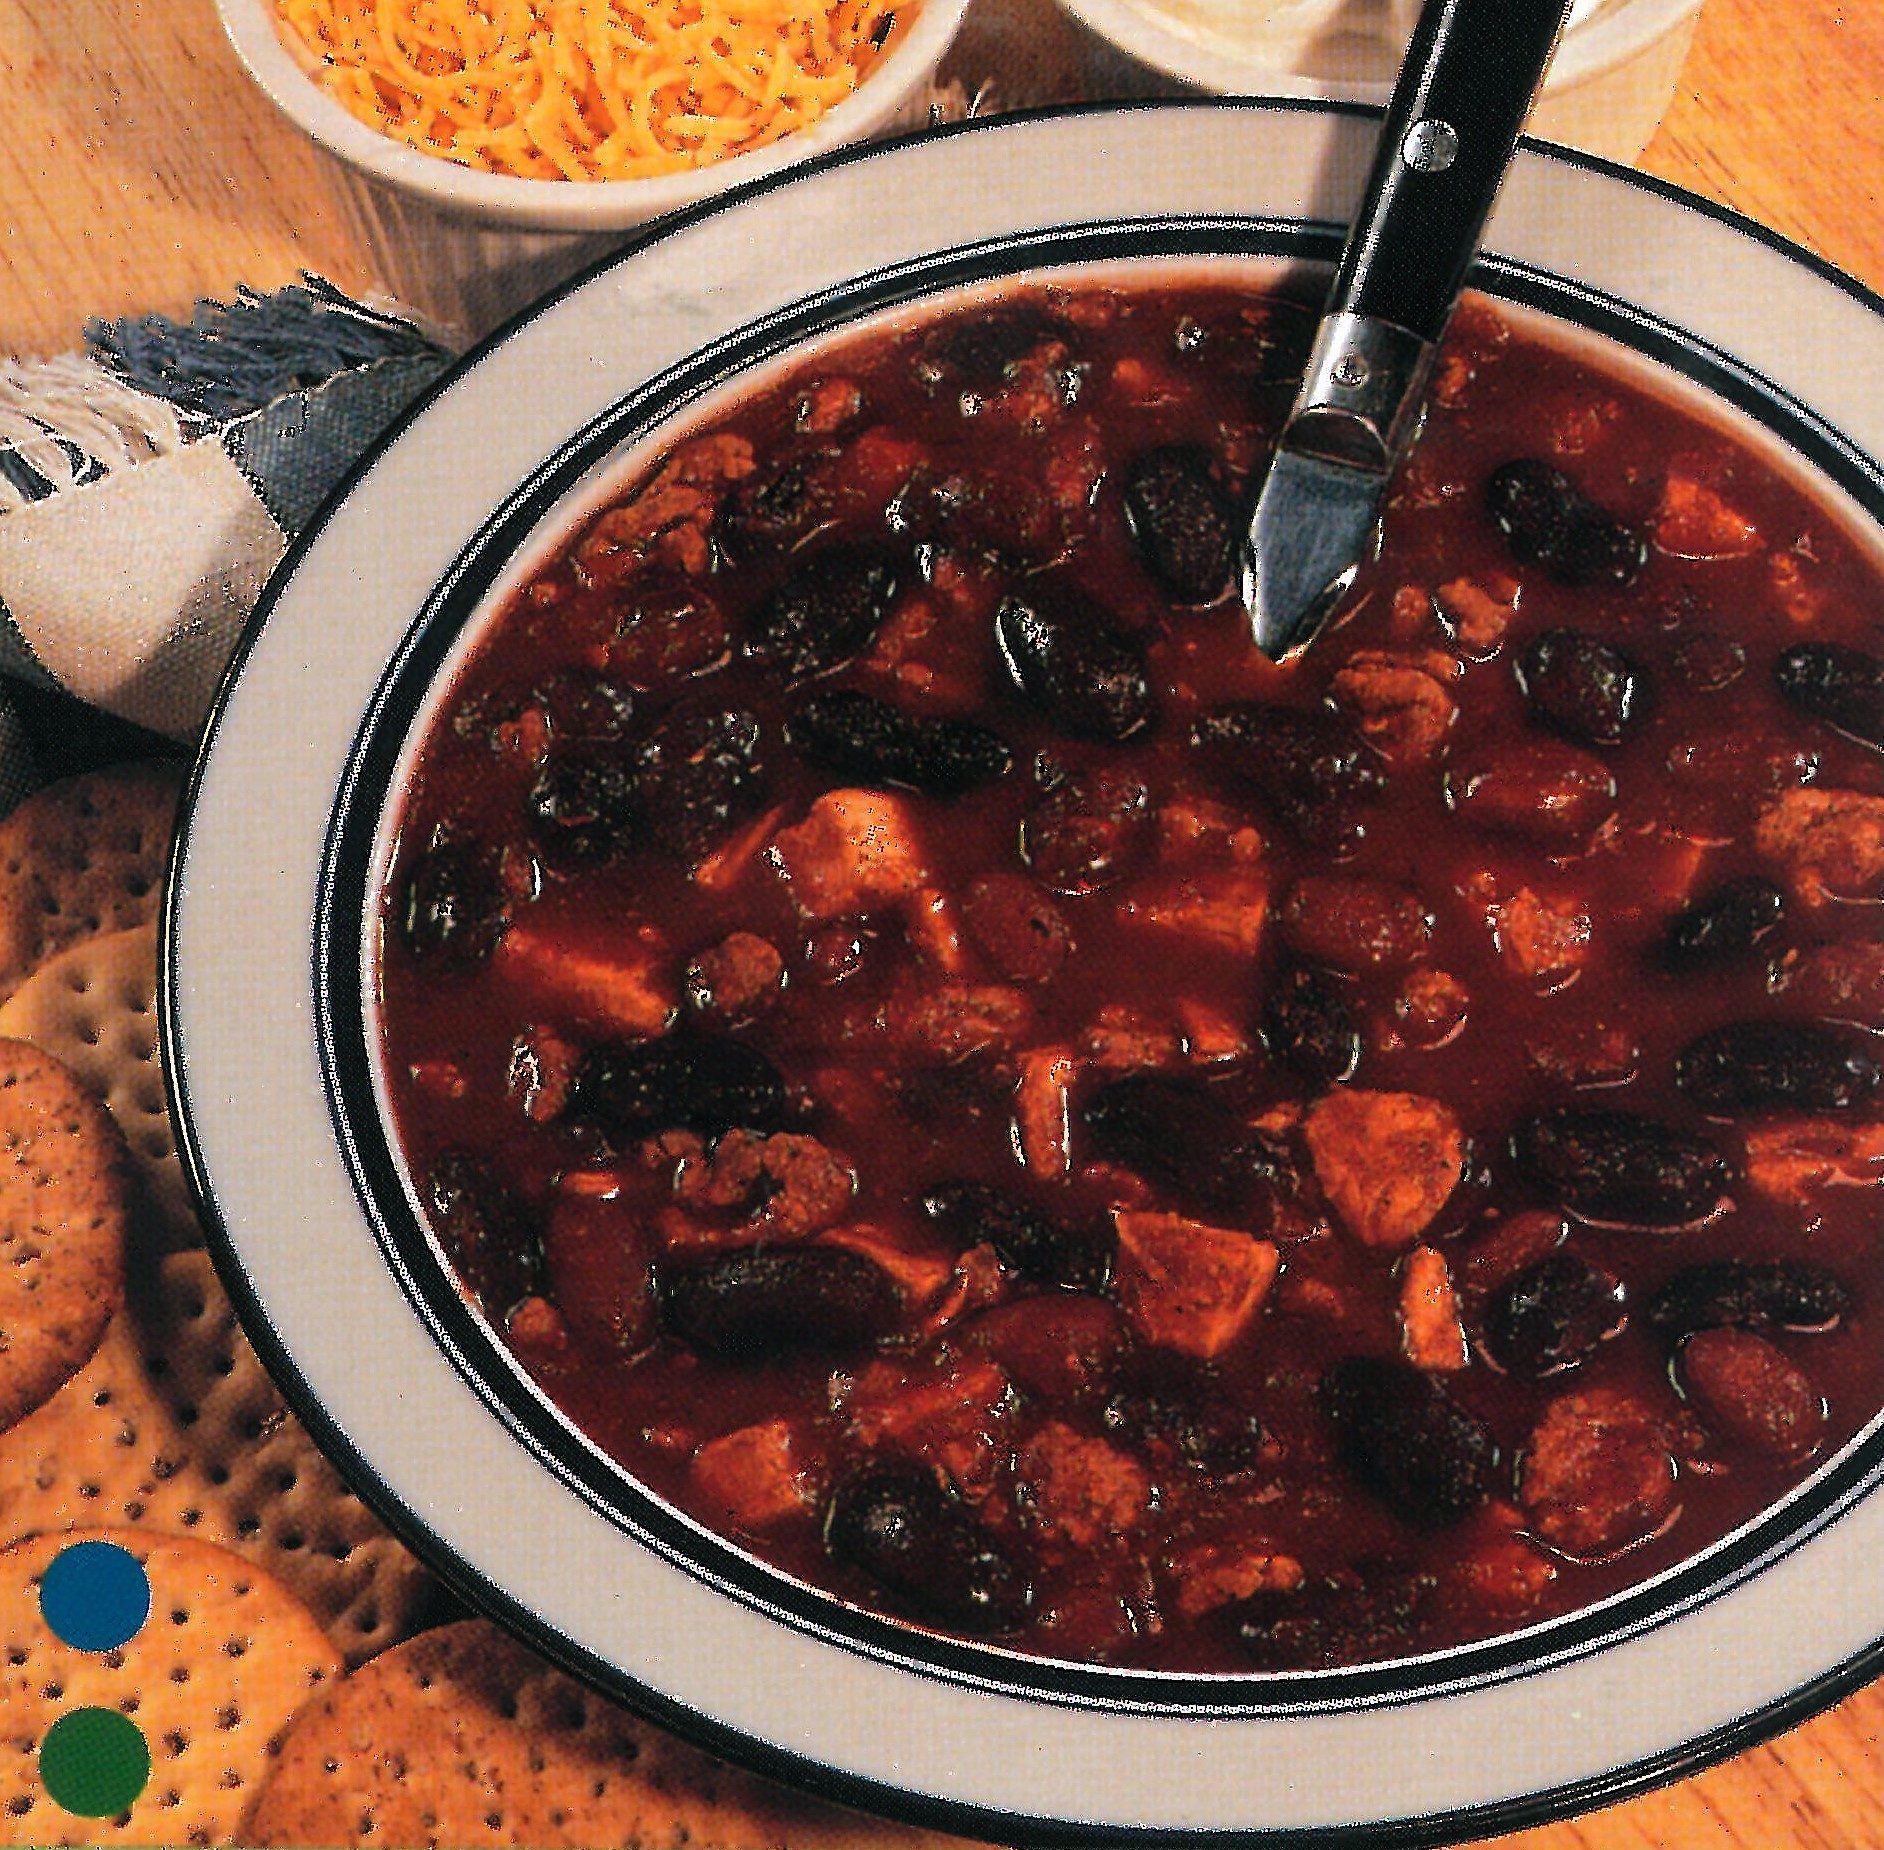 An image depicting the malted chicken turkey chili recipe brought to you by the Bean Institute.